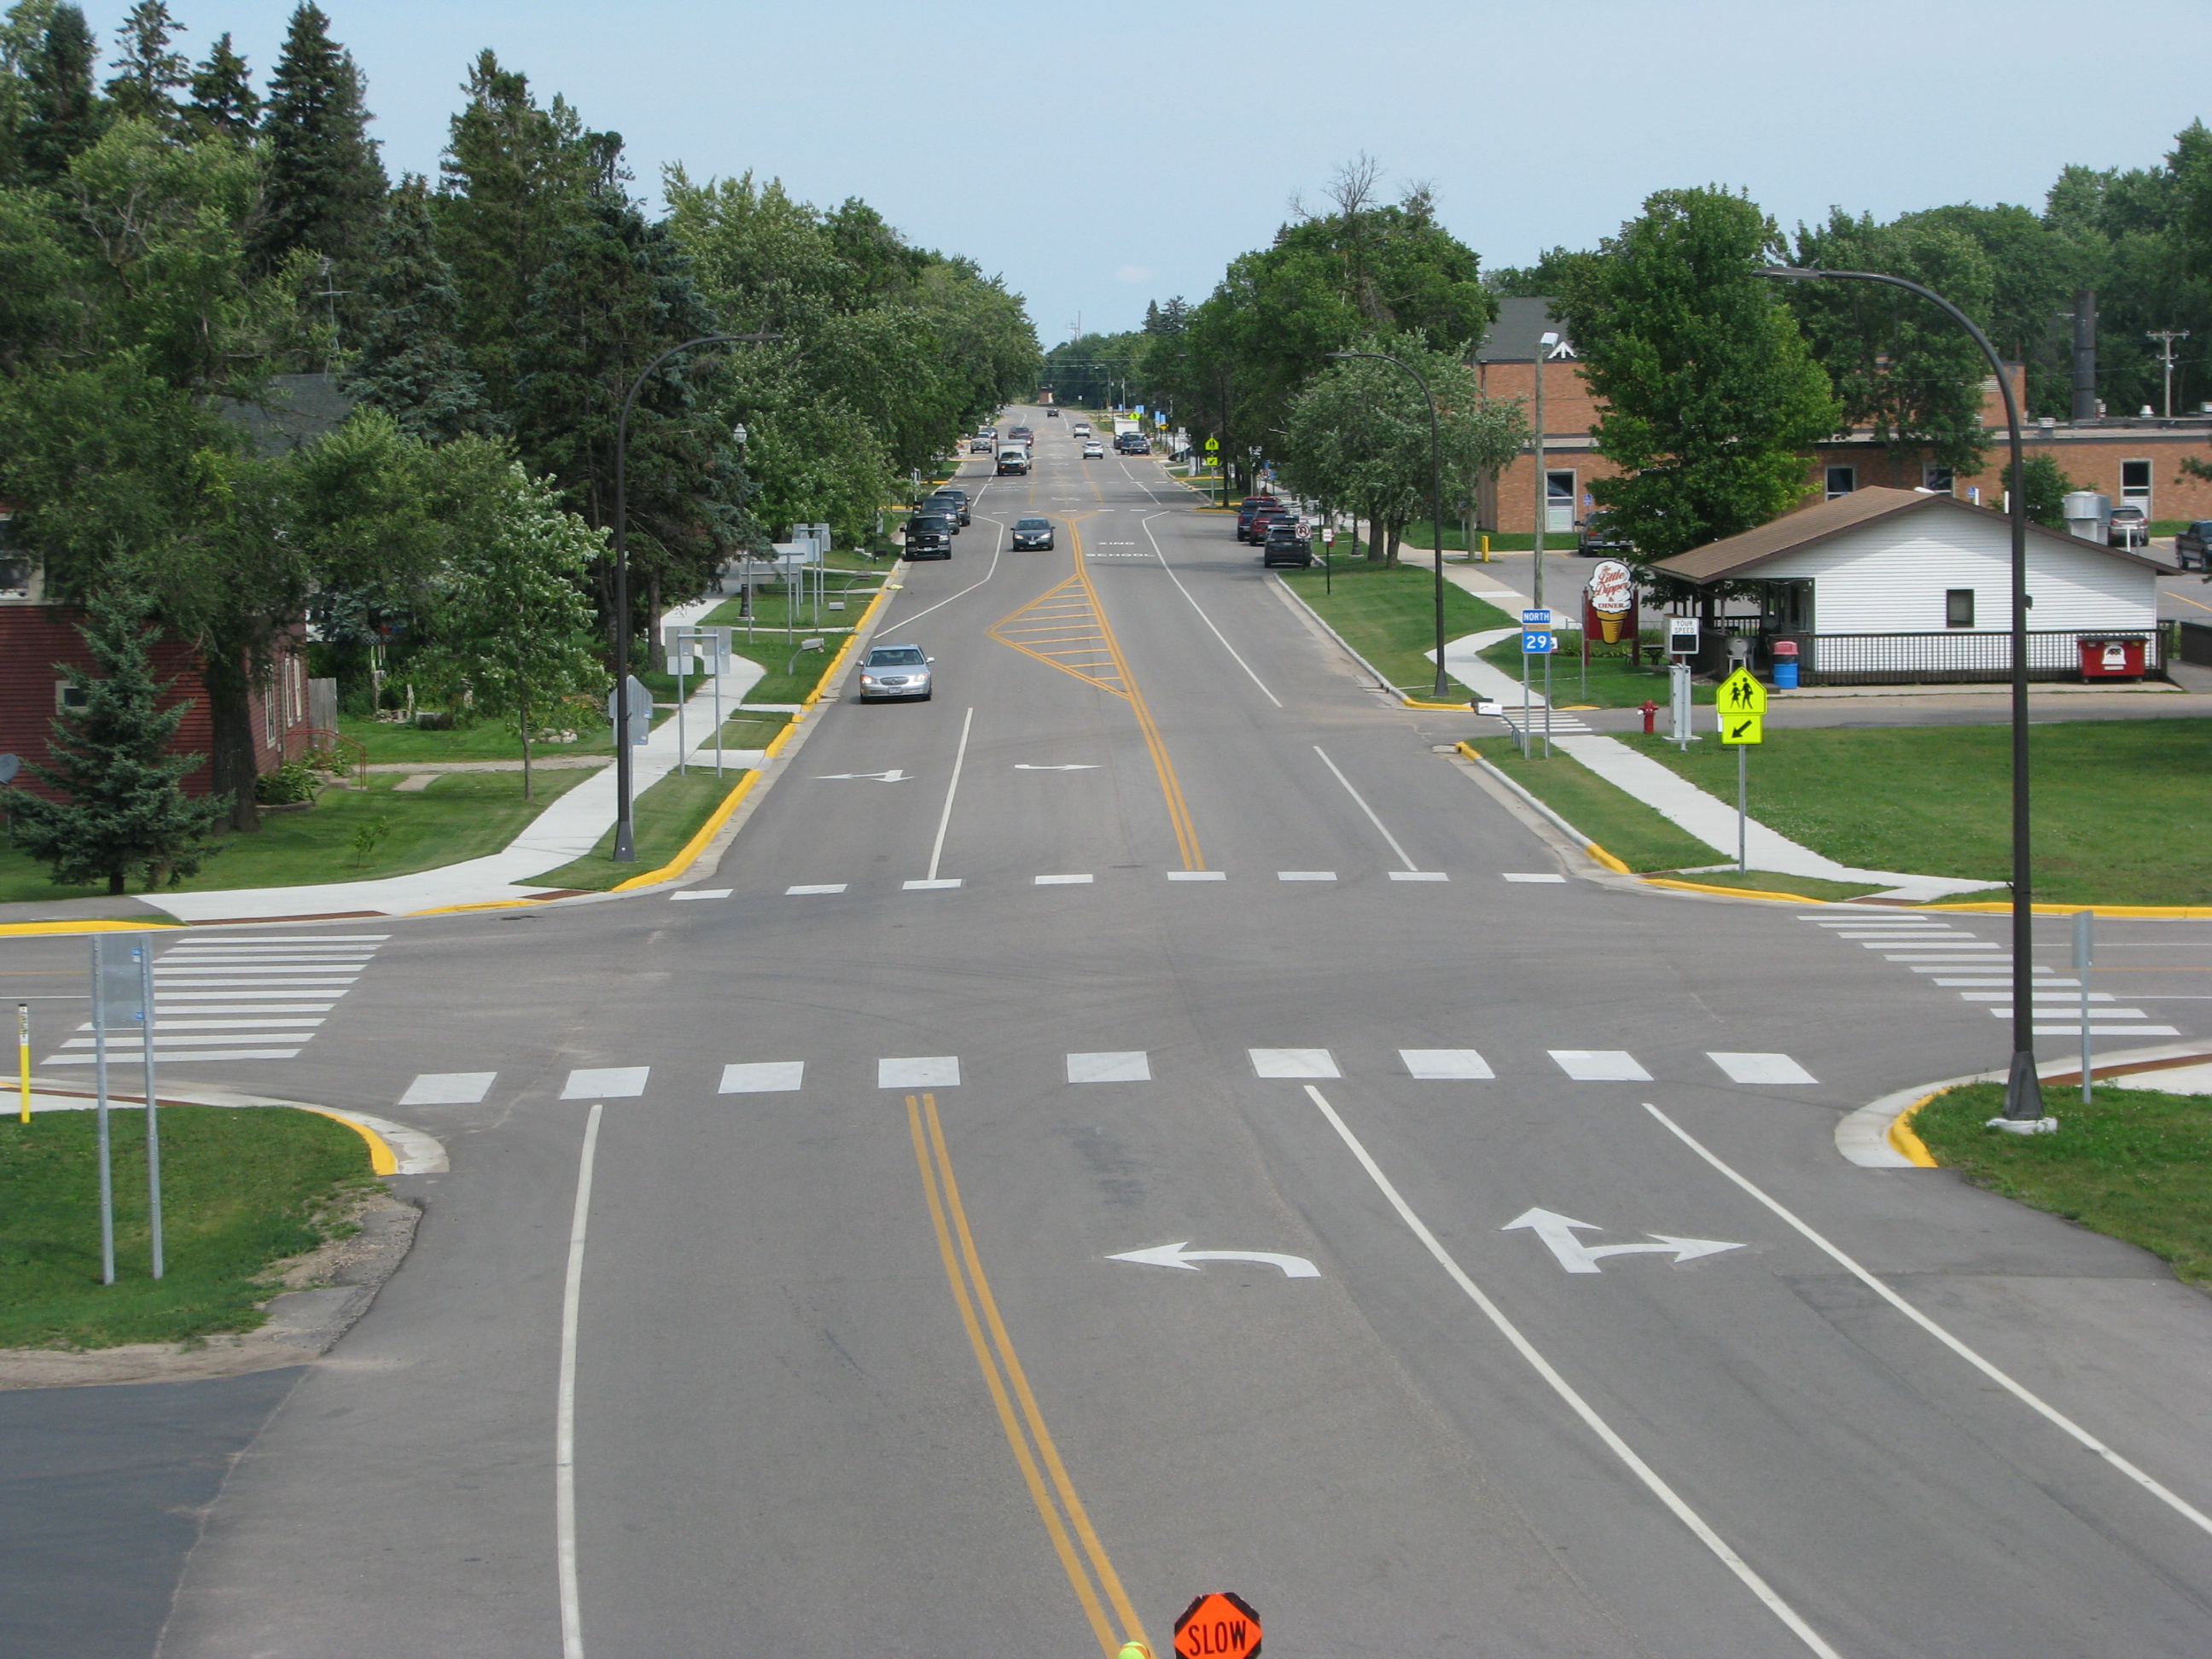 An intersection along Hwy 29/Otter Avenue through Parkers Prairie